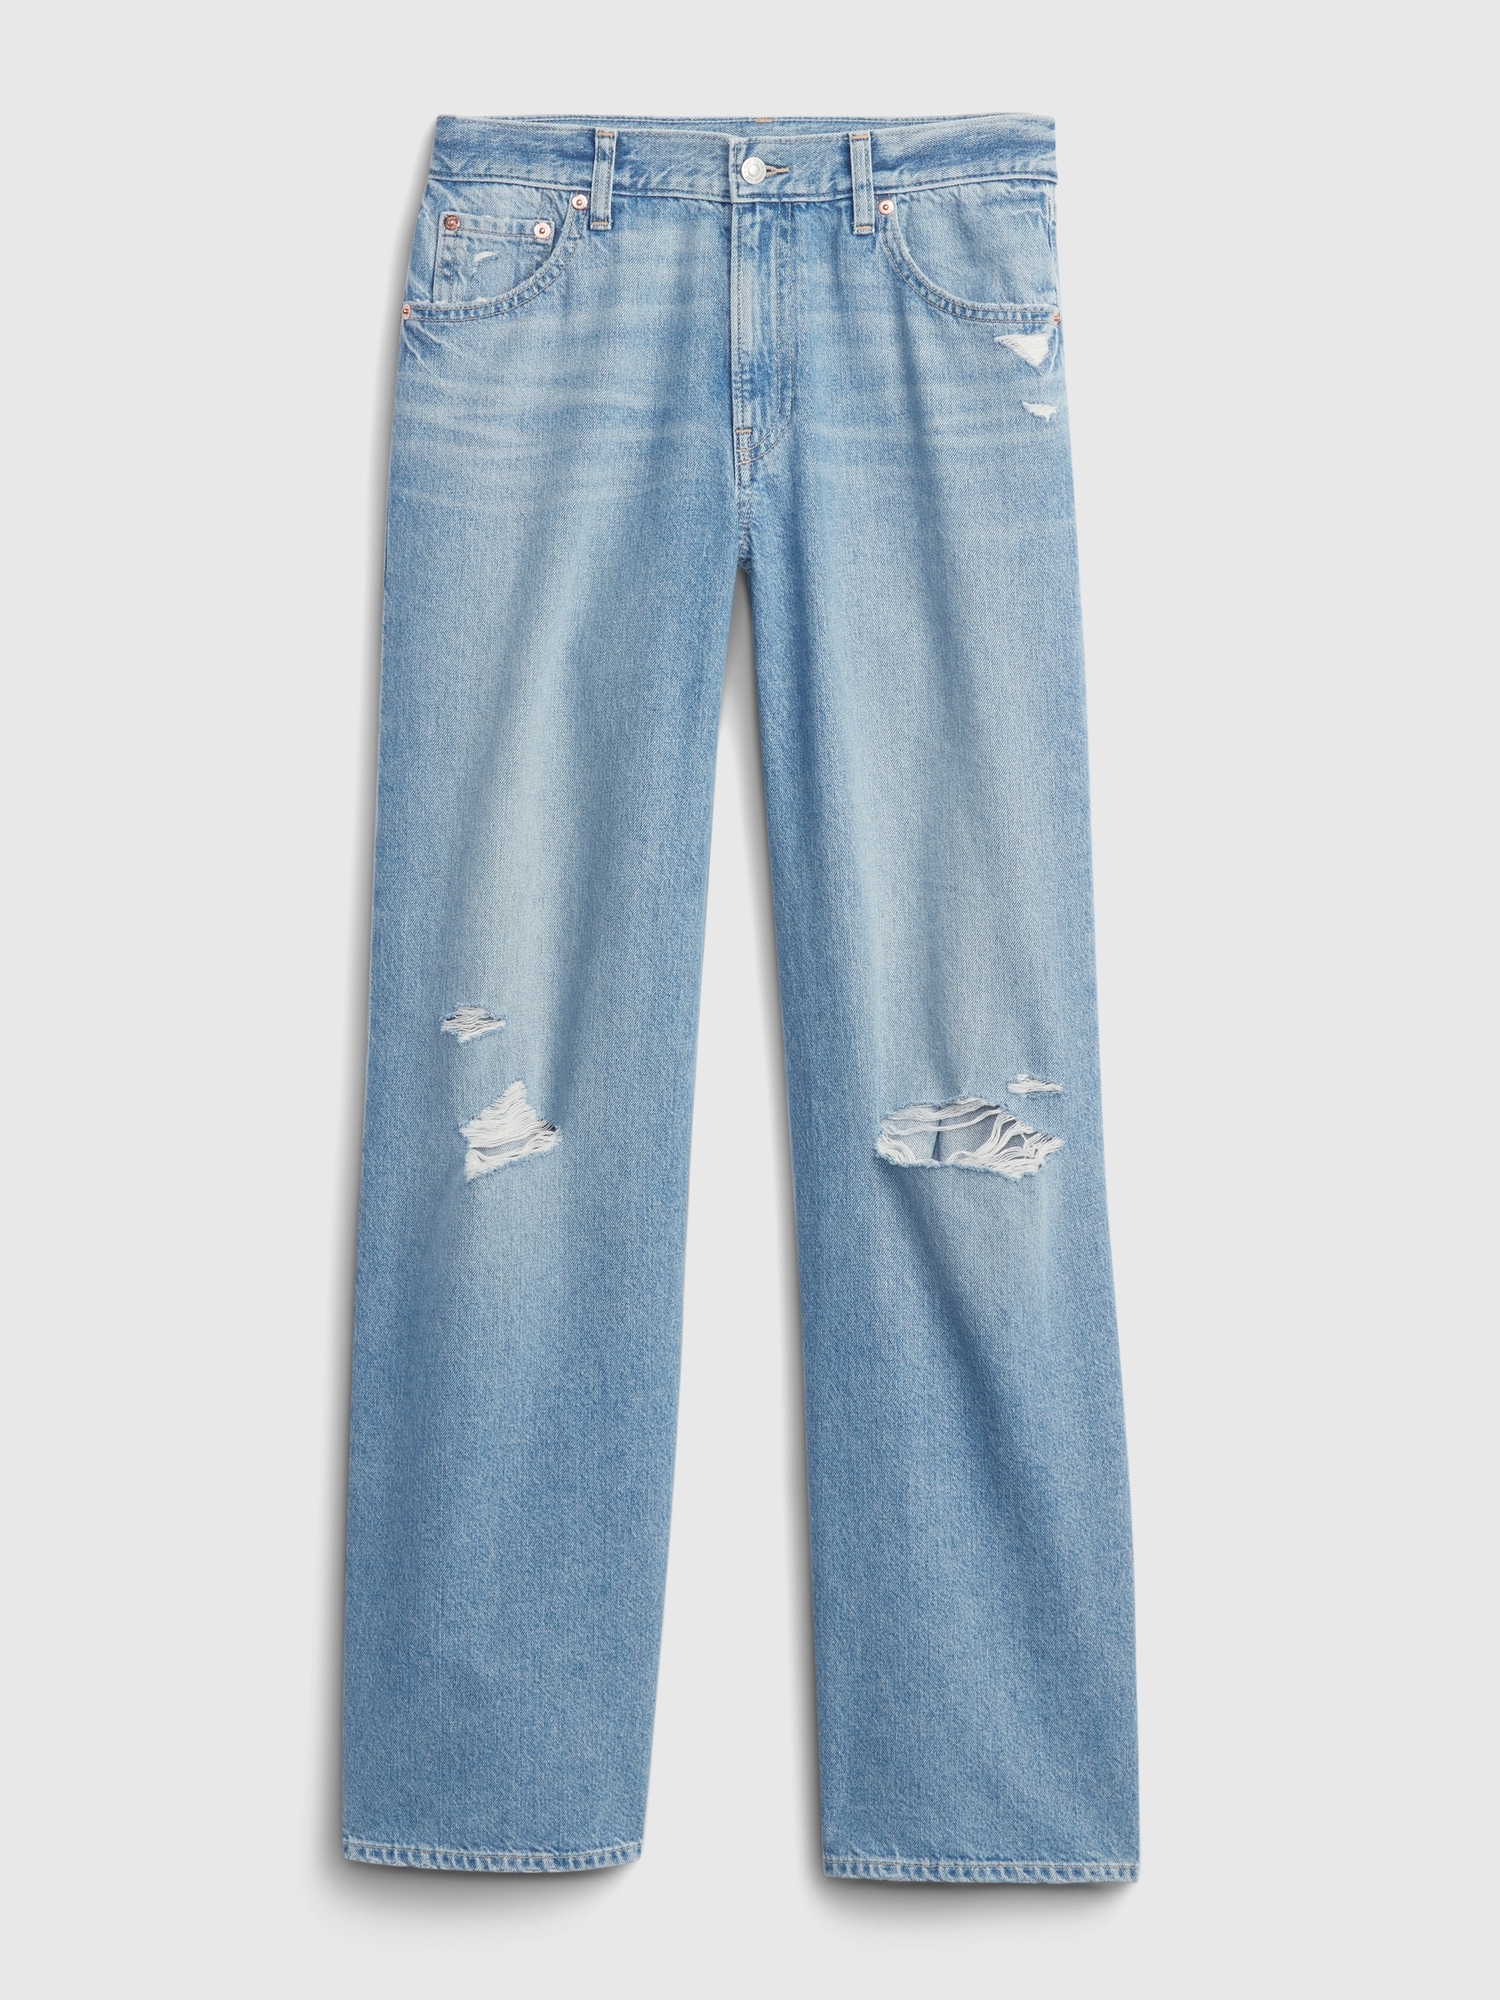 Low Rise Stride Jeans with Washwell | Gap